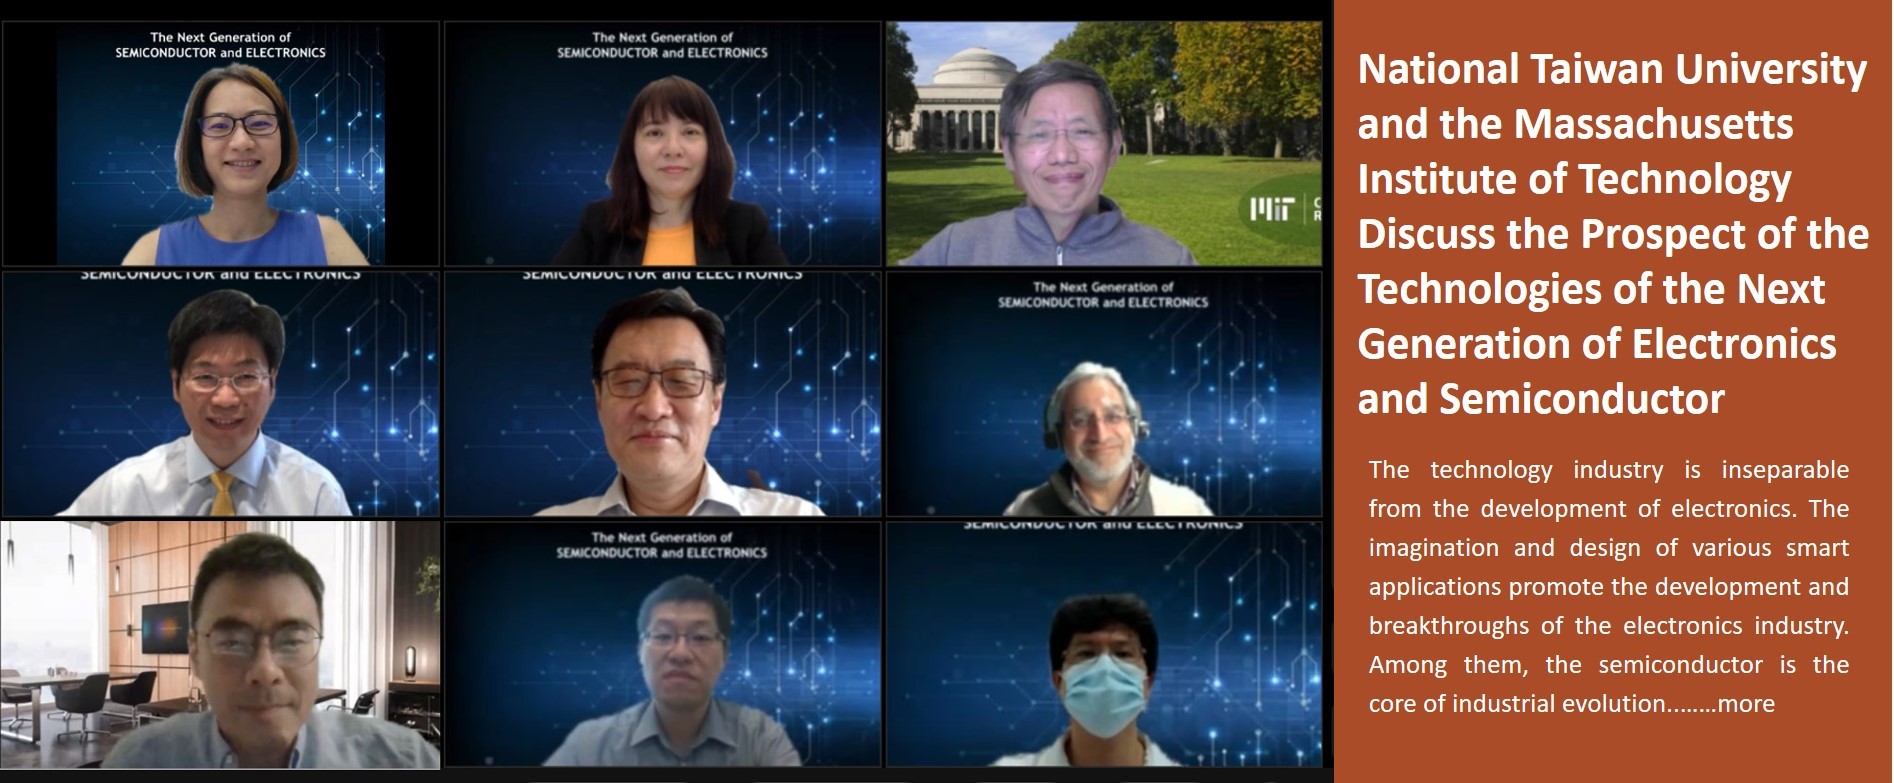 National Taiwan University and the Massachusetts Institute of Technology Discuss the Prospect of the Technologies of the Next Generation of Electronics and Semiconductor